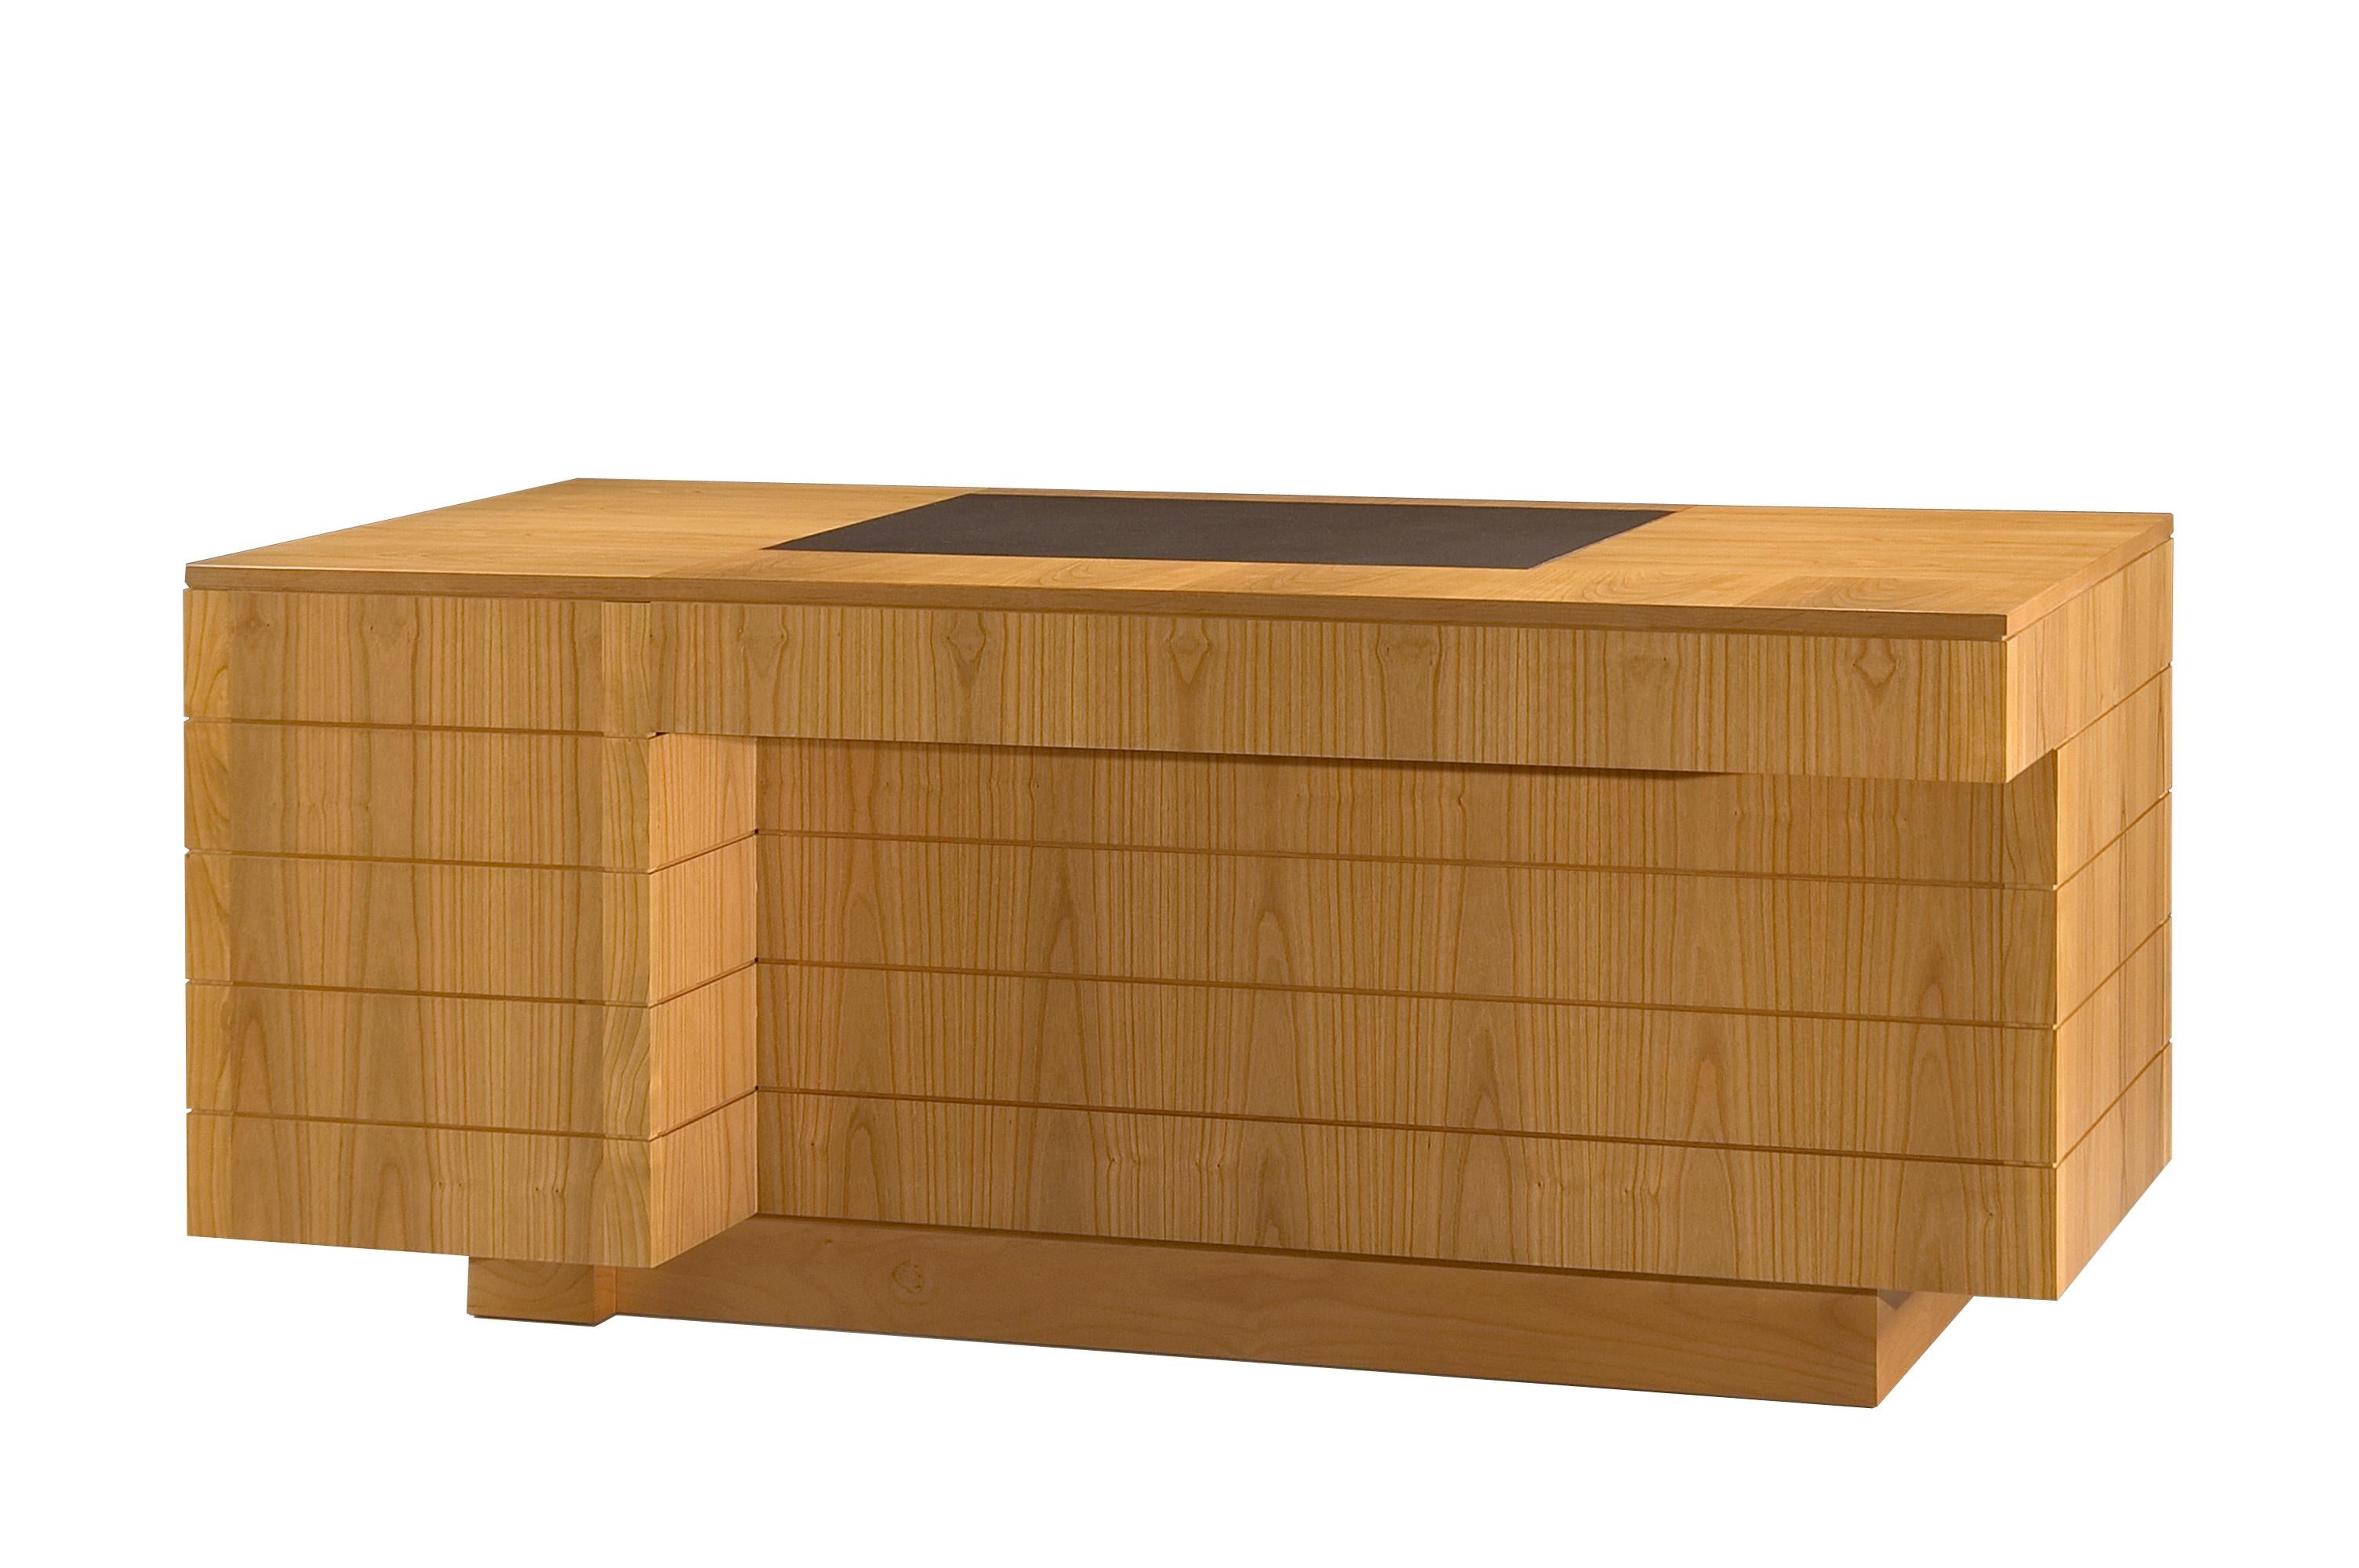 Contemporary Wooden Desk Made of Cherry Wood with Leather Top and Drawers, by Morelato